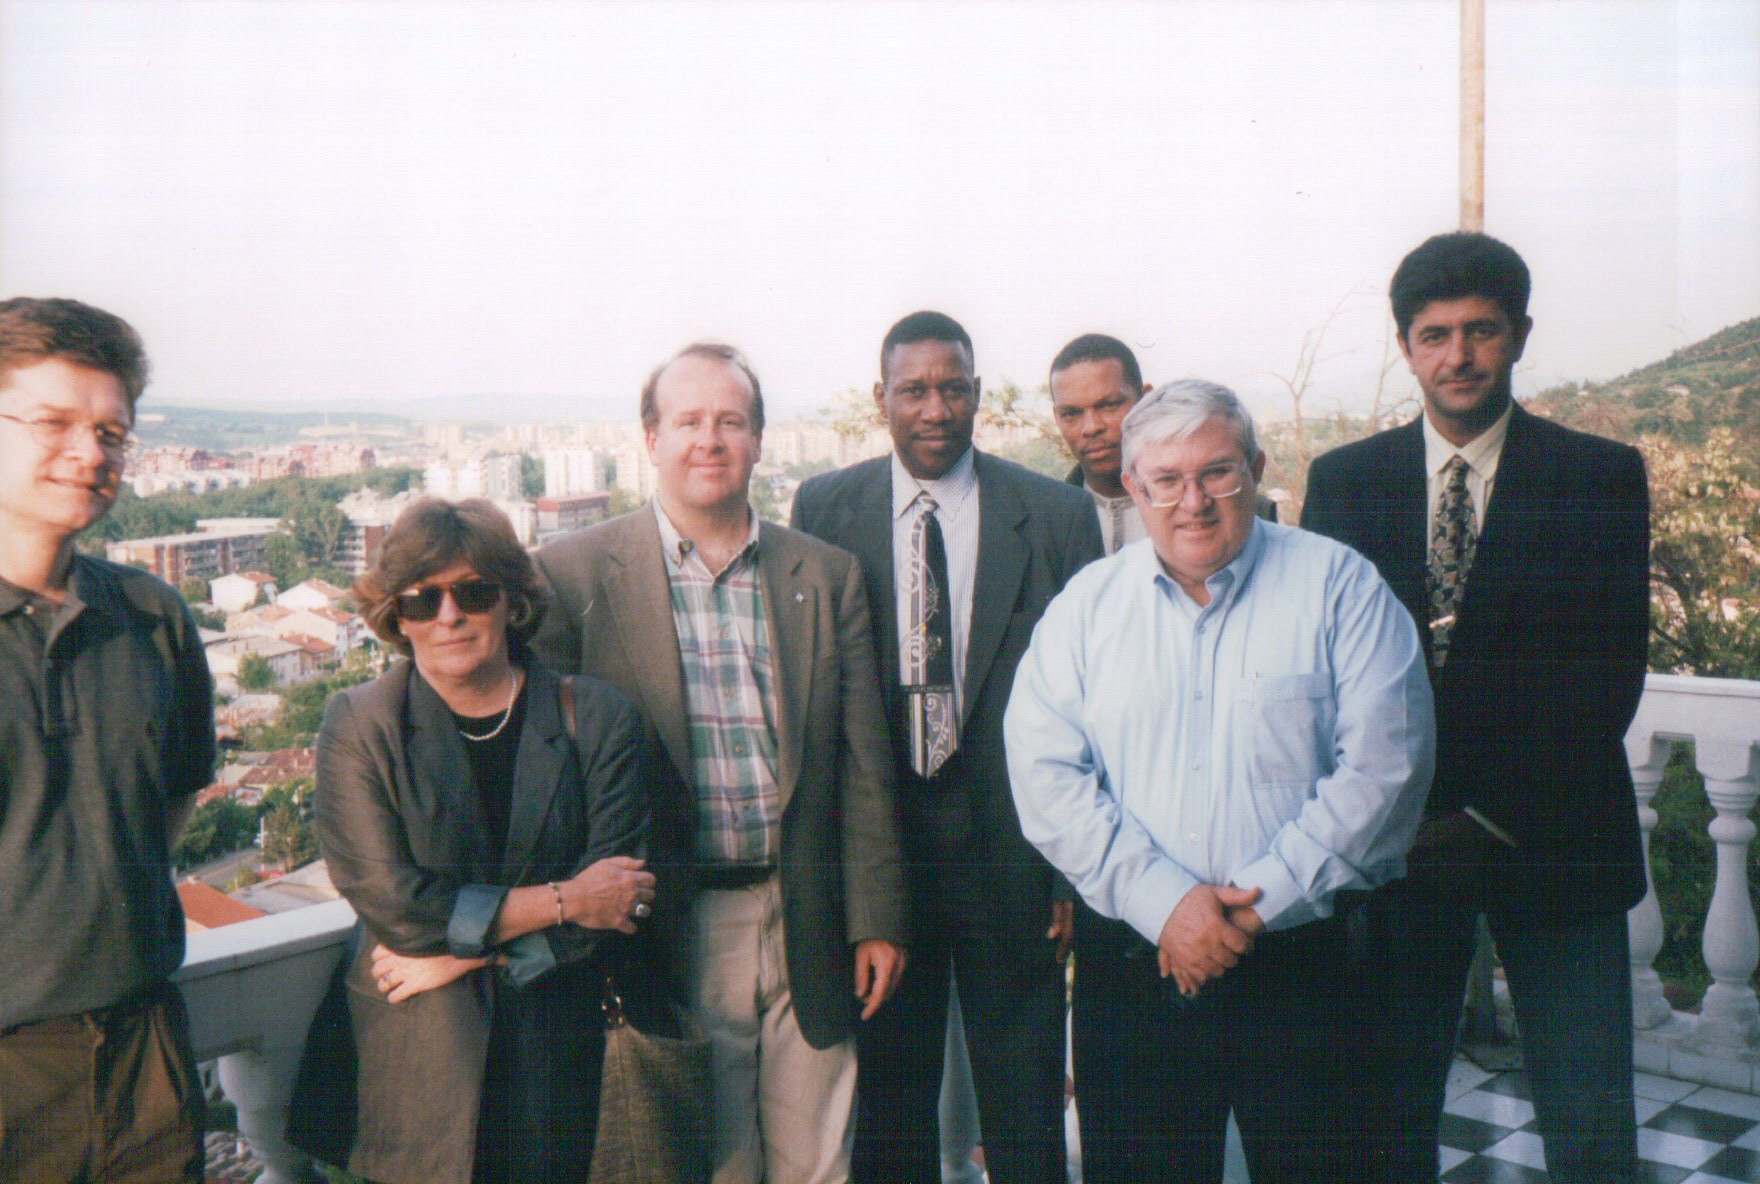 Mission to Skopje, May 1999, photo provided by Mr Graham Blewitt